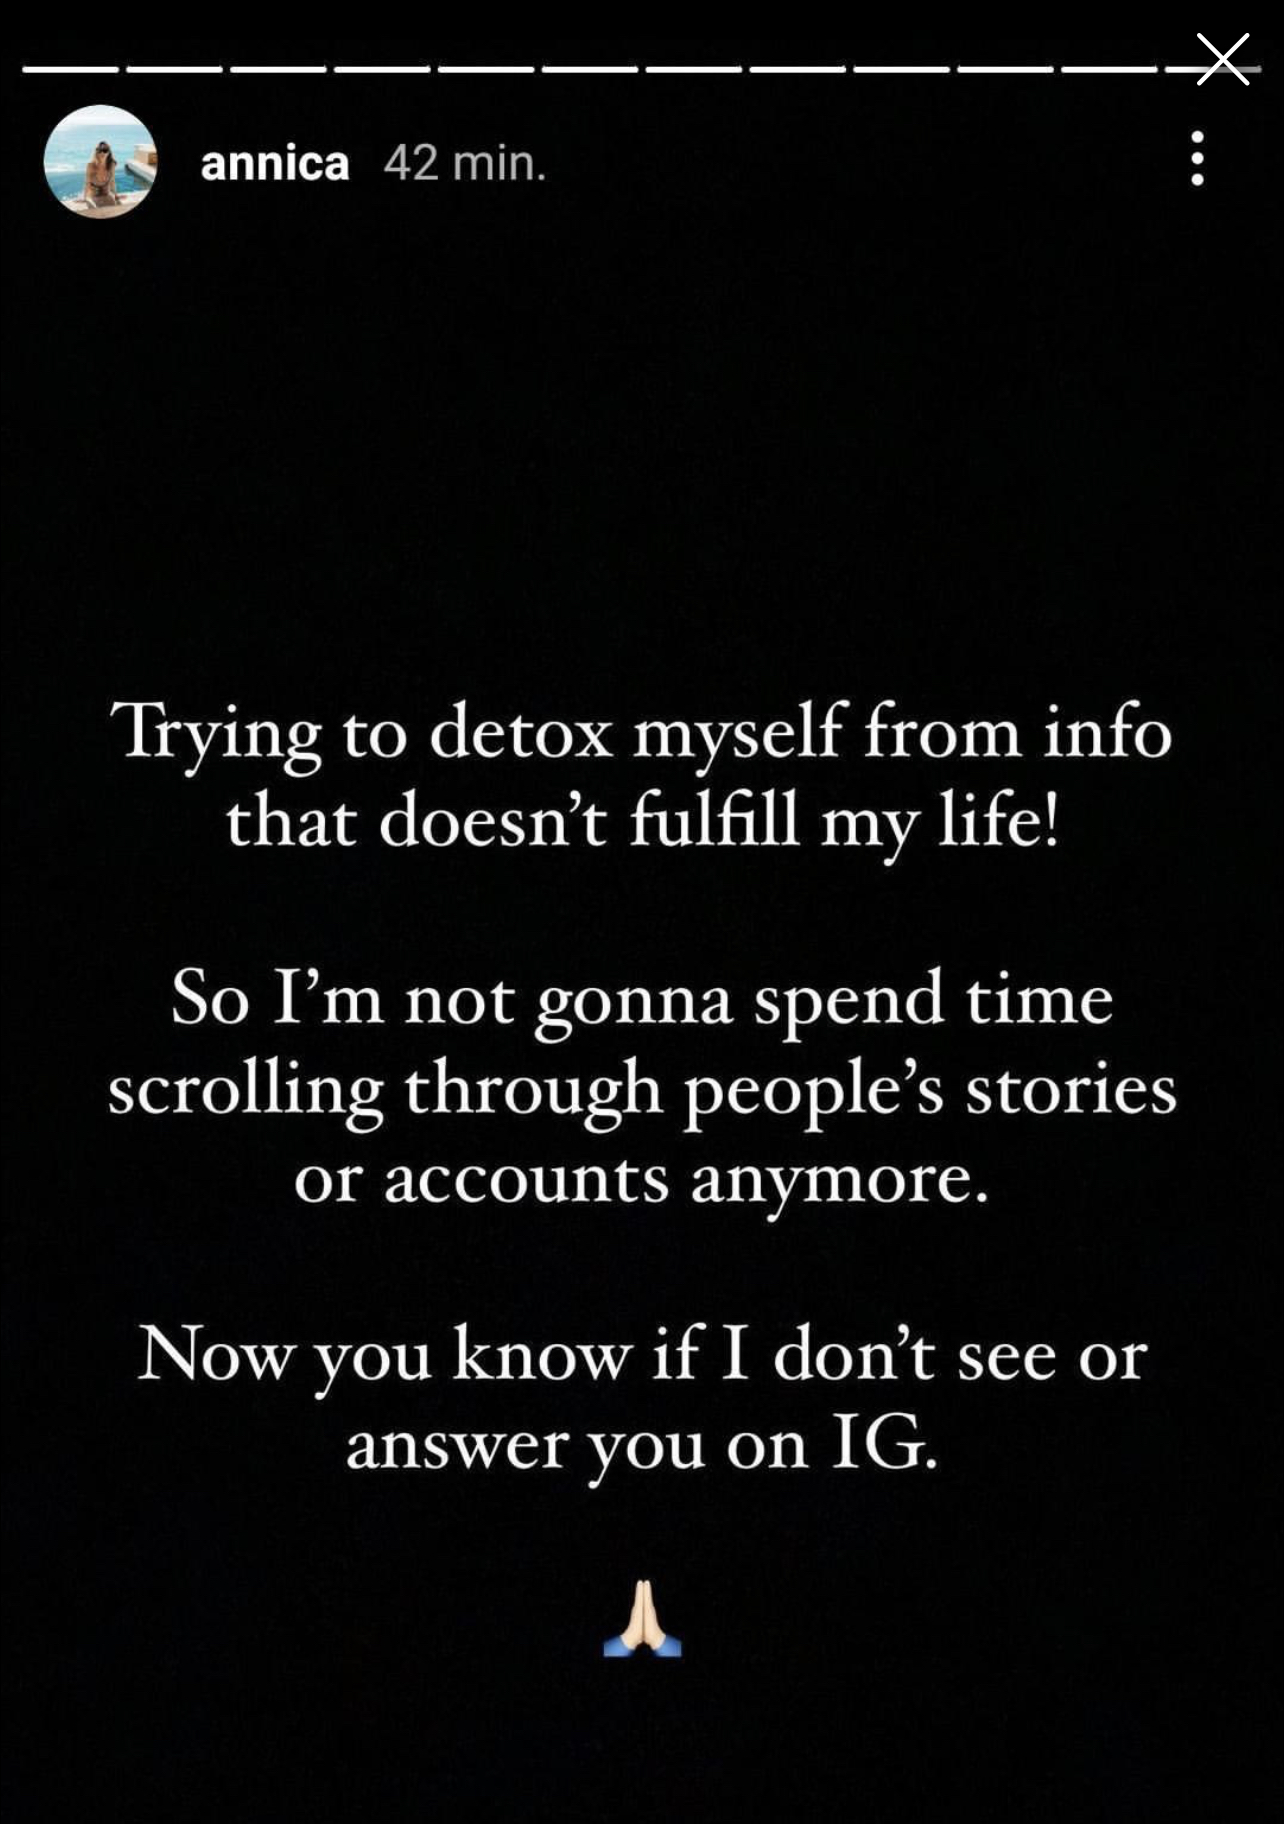 Annica Englund: Trying to detox myself from info that doesn't fulfill my life. So I'm not gonna spend time scrolling through people's stories or accounts anymore. Now you know if I don't see or answer you on IG. 